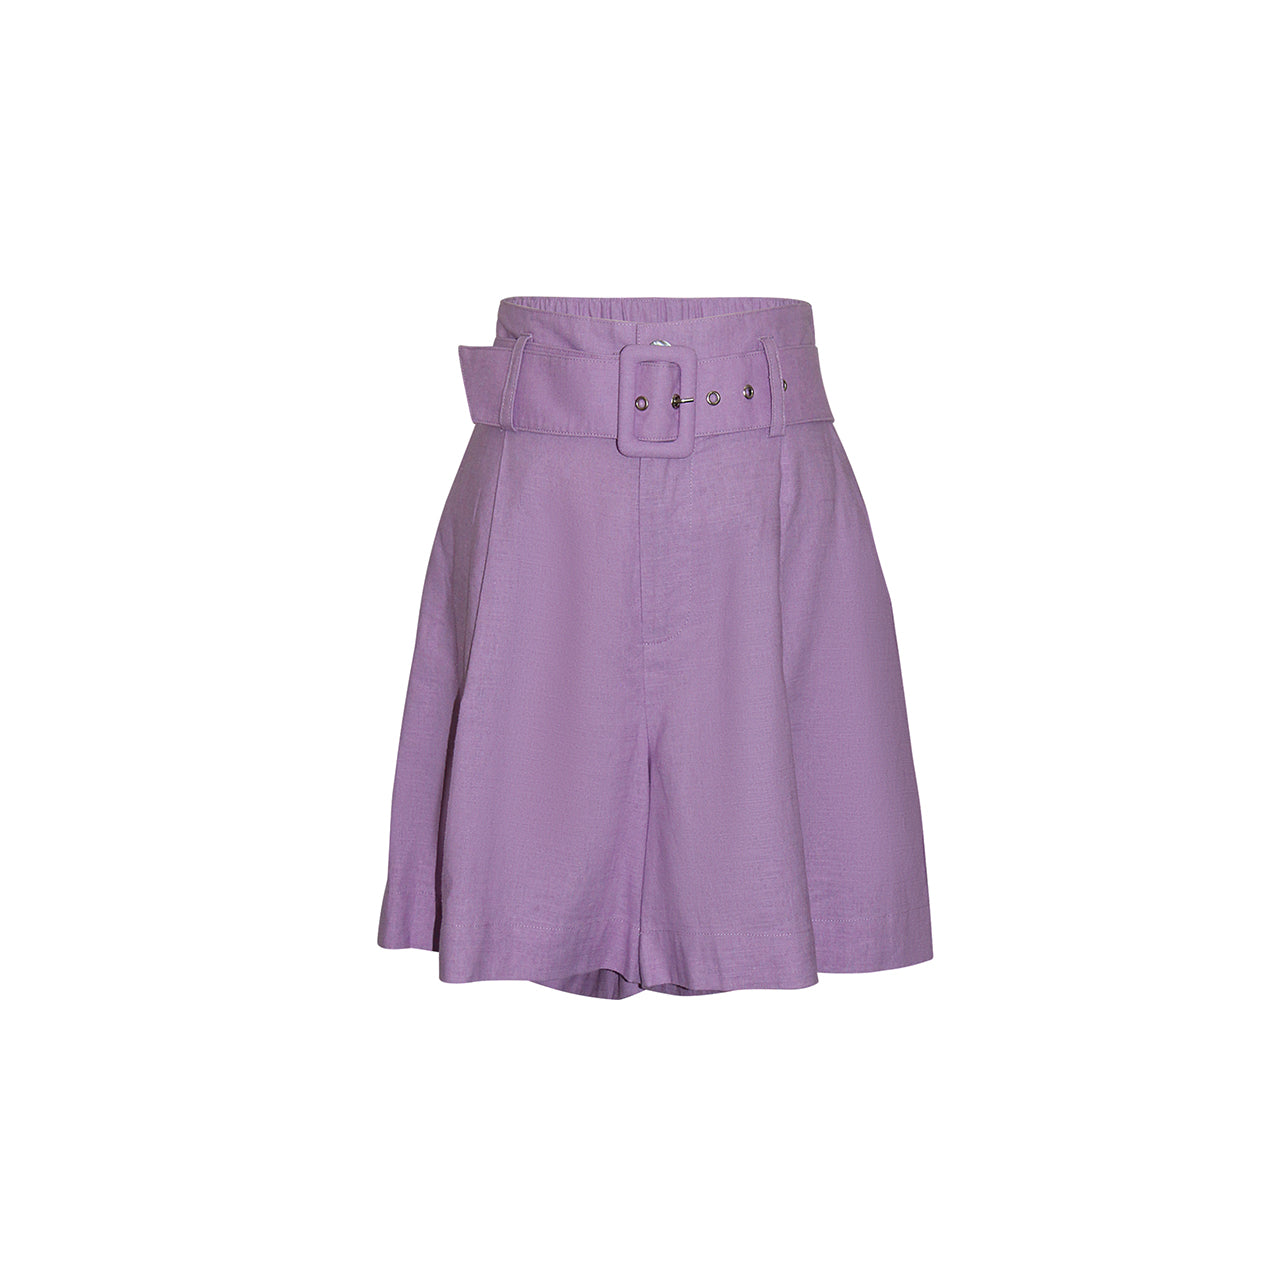  "NOVA" Cotton Linen Shorts in Pastel Violet by Gosia Orlowska - Premium Comfort and Style